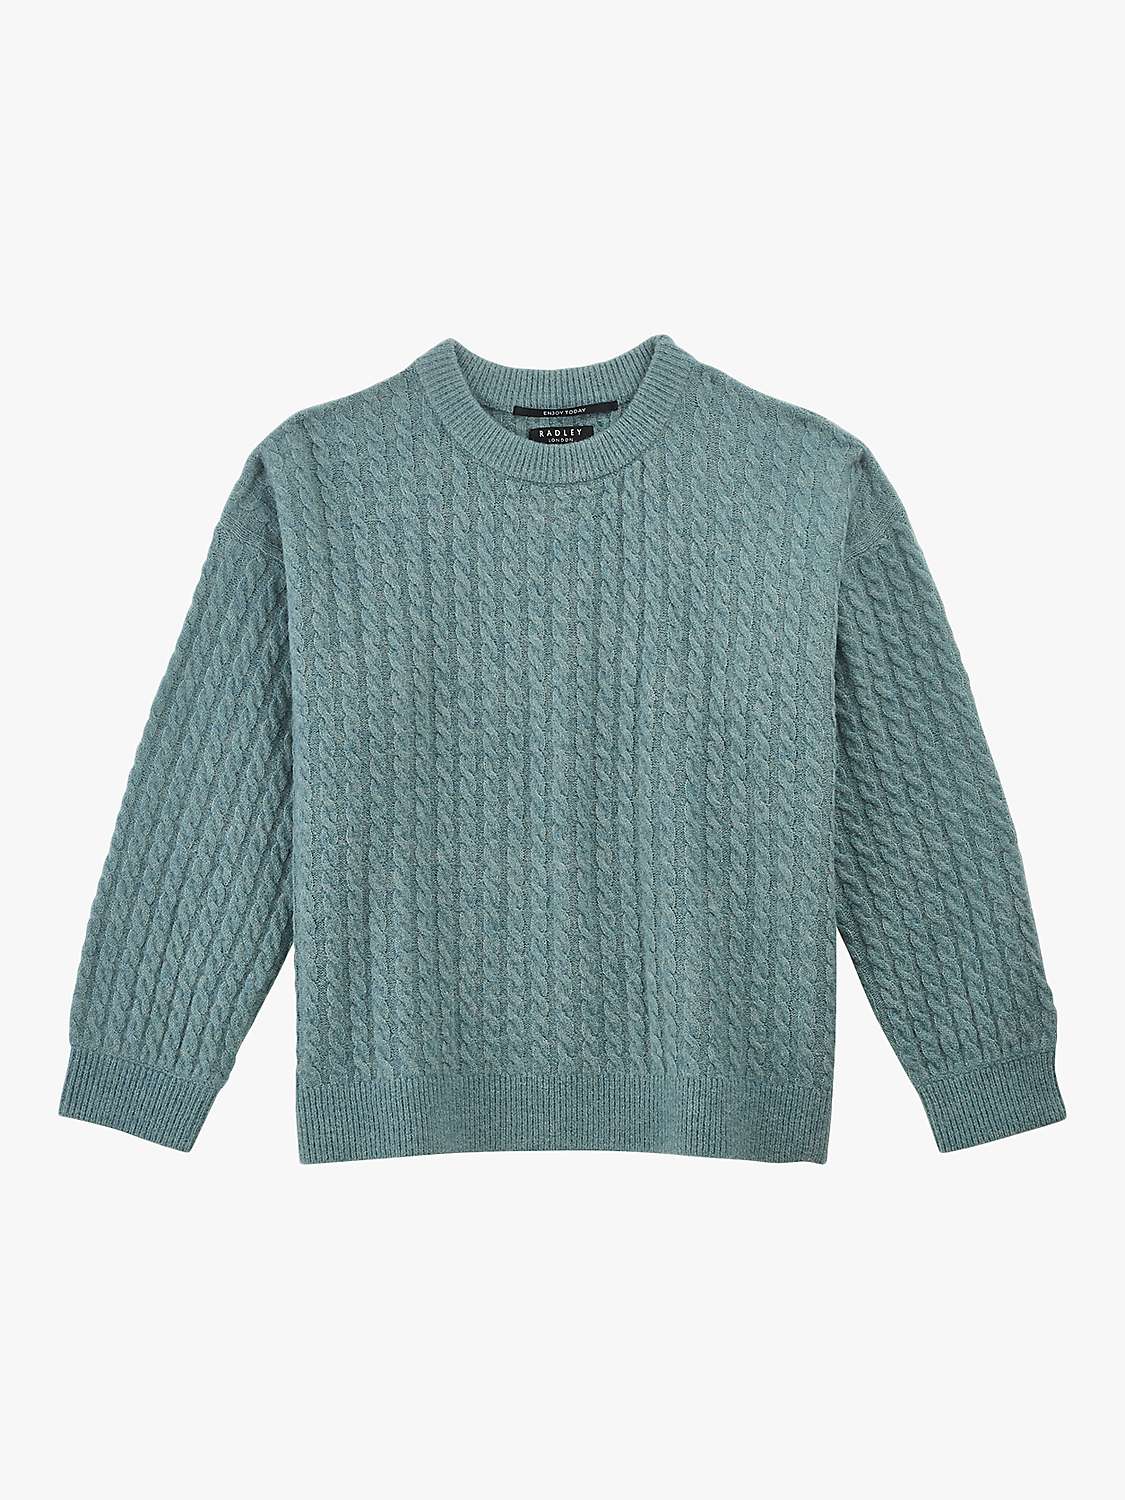 Buy Radley Dukes Fluffy Cable Jumper, Ice Blue Online at johnlewis.com